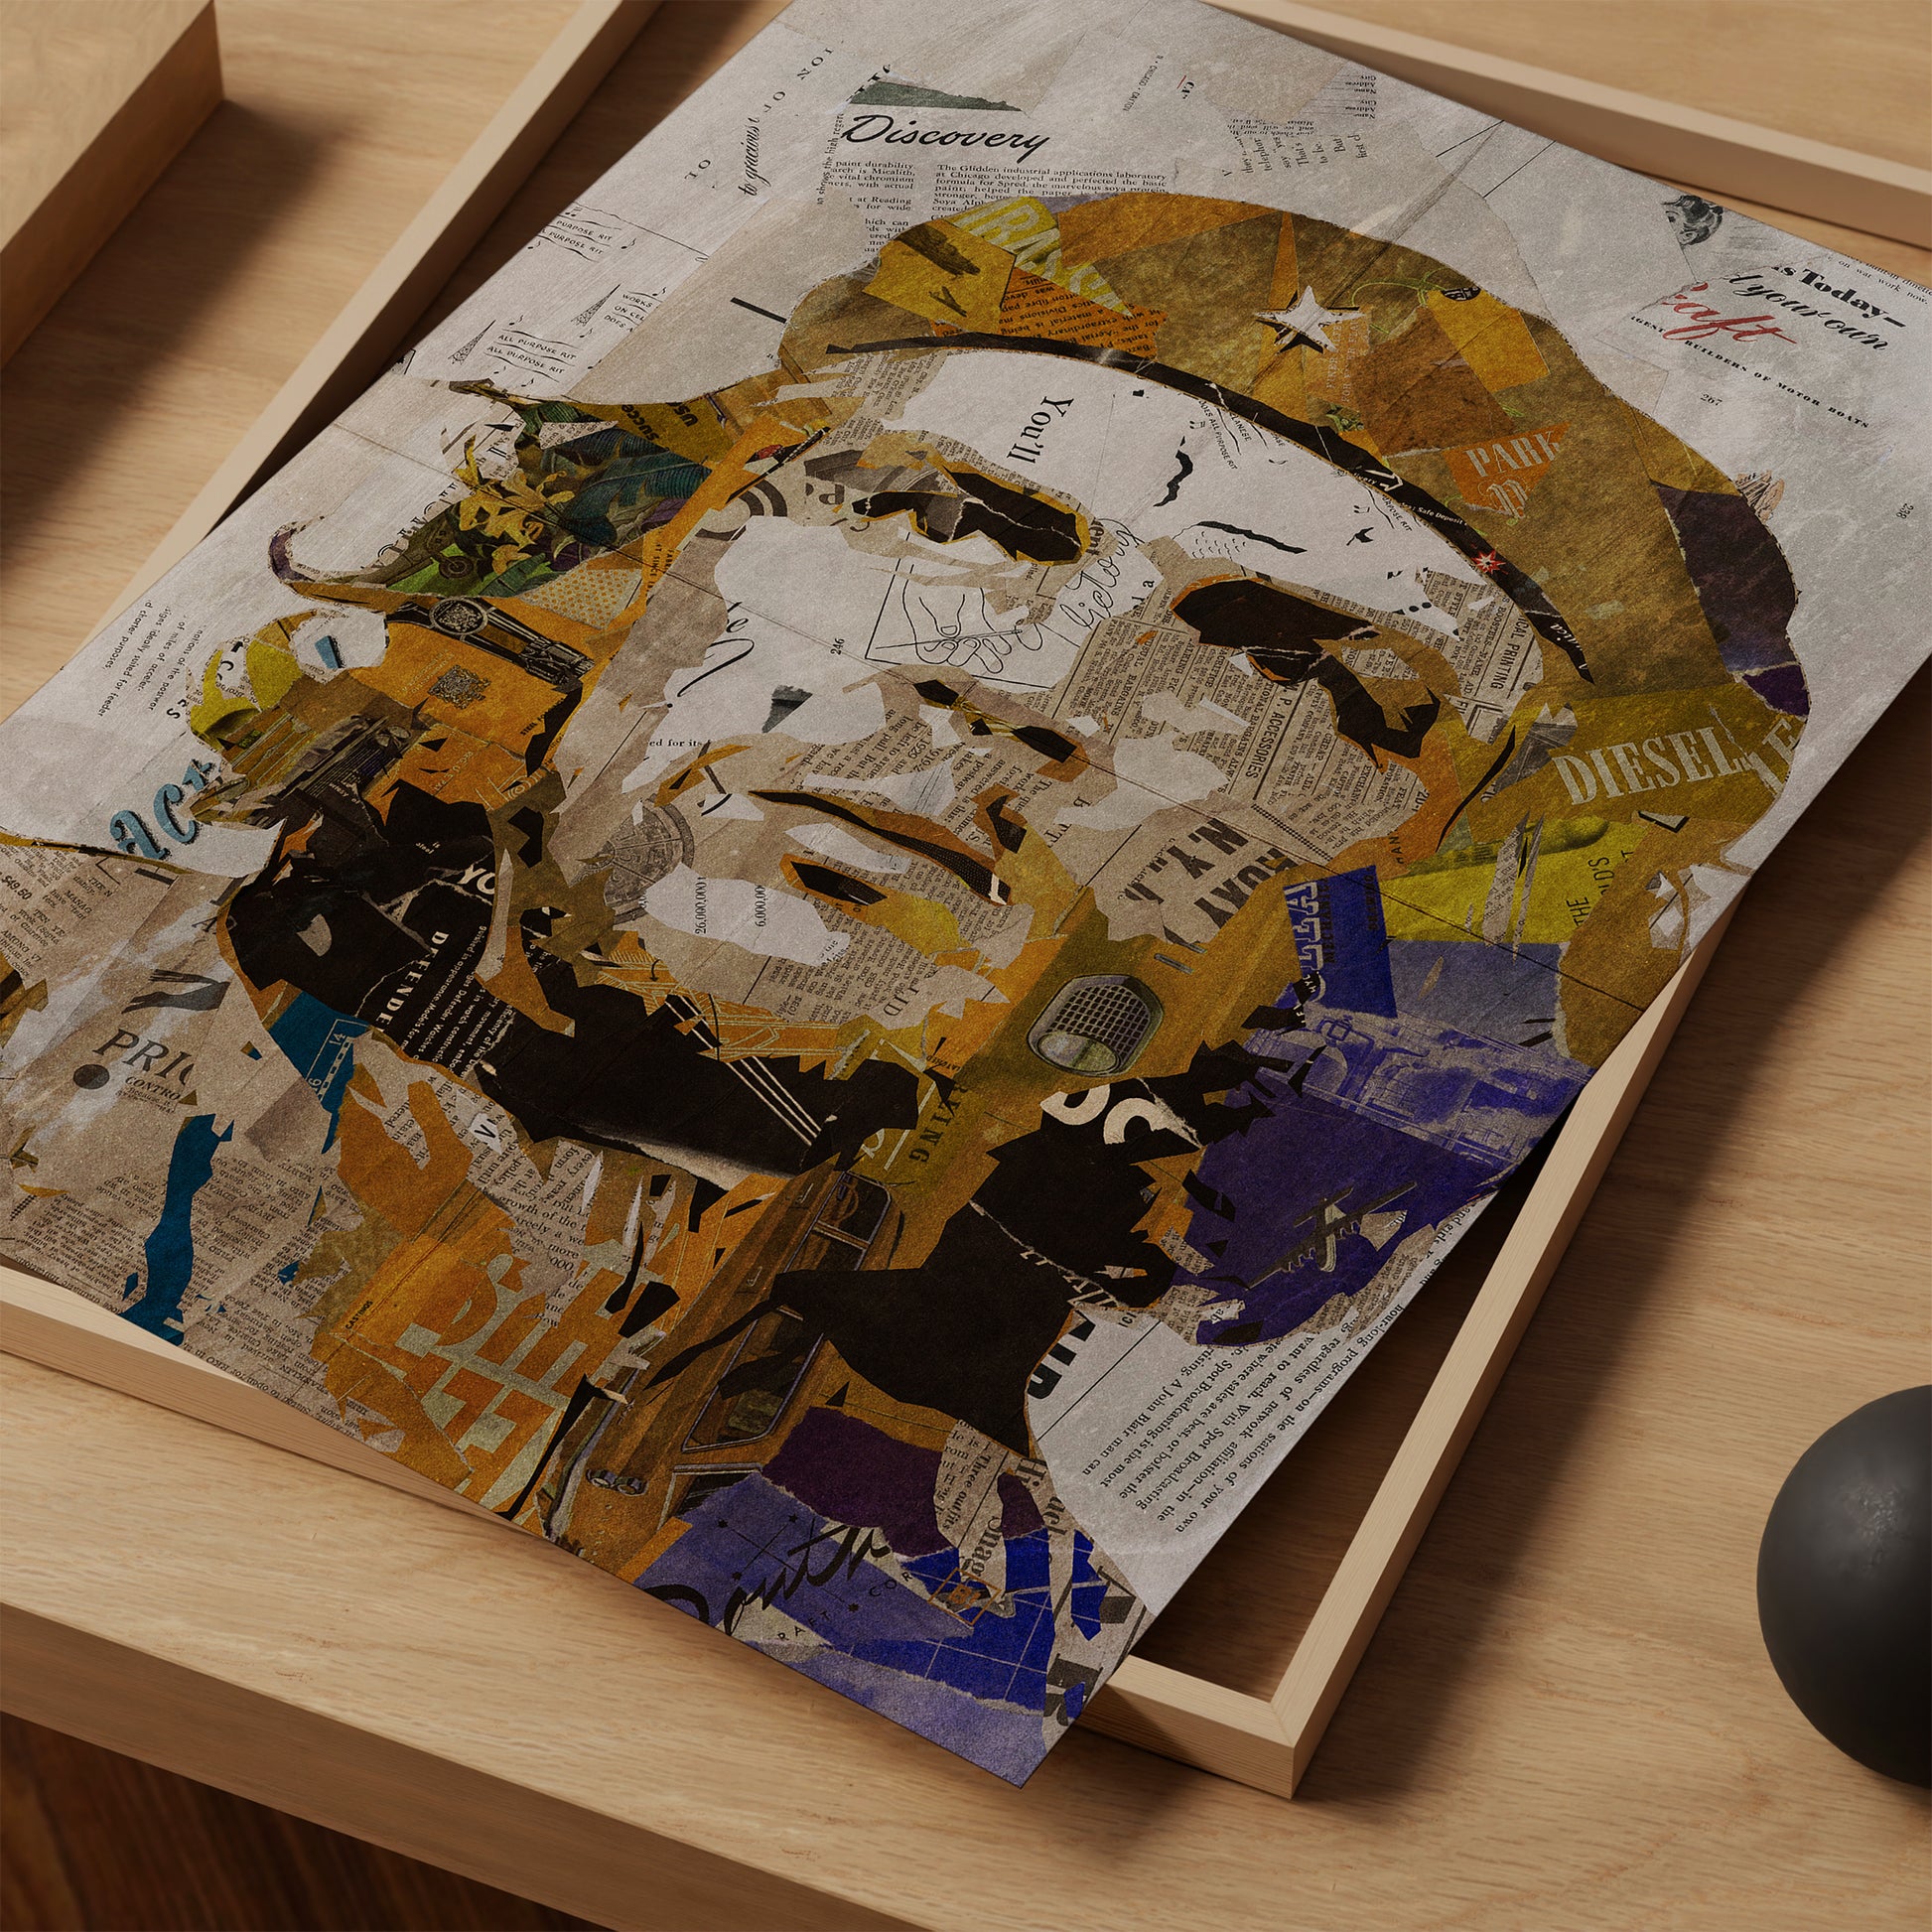 Be inspired by our iconic collage portrait art print of Che Guevara. This artwork was printed using the giclée process on archival acid-free paper and is presented as a print close-up, capturing its timeless beauty in every detail.